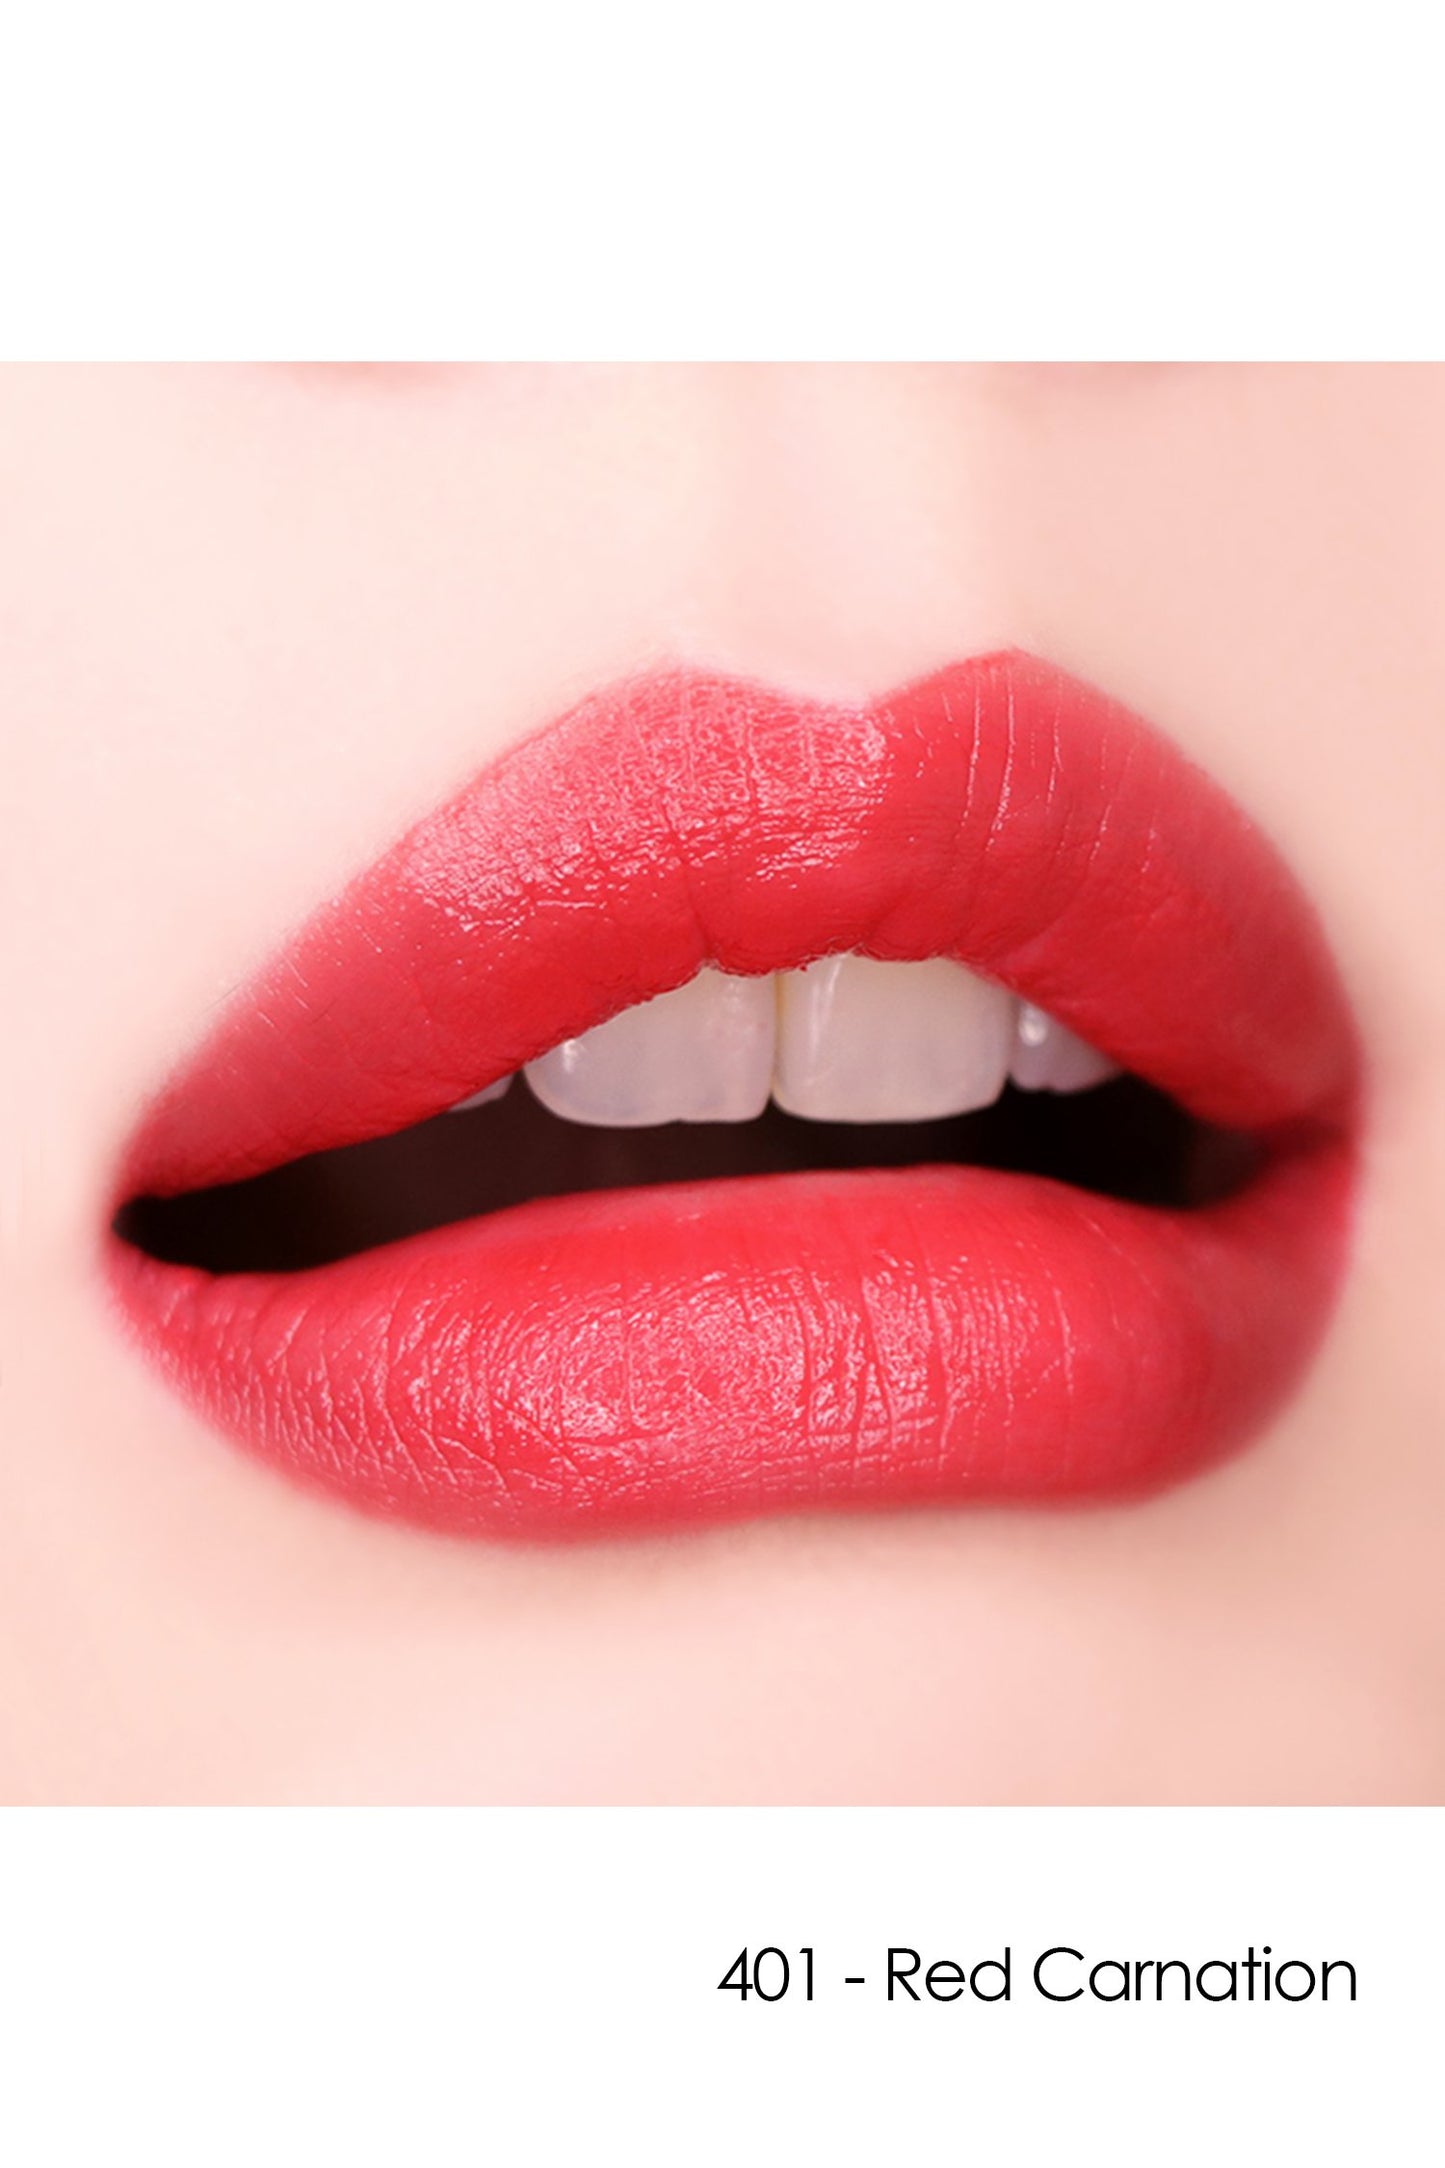 Lips with Lipstick F: Fairy Flower 401 - Red Carnation